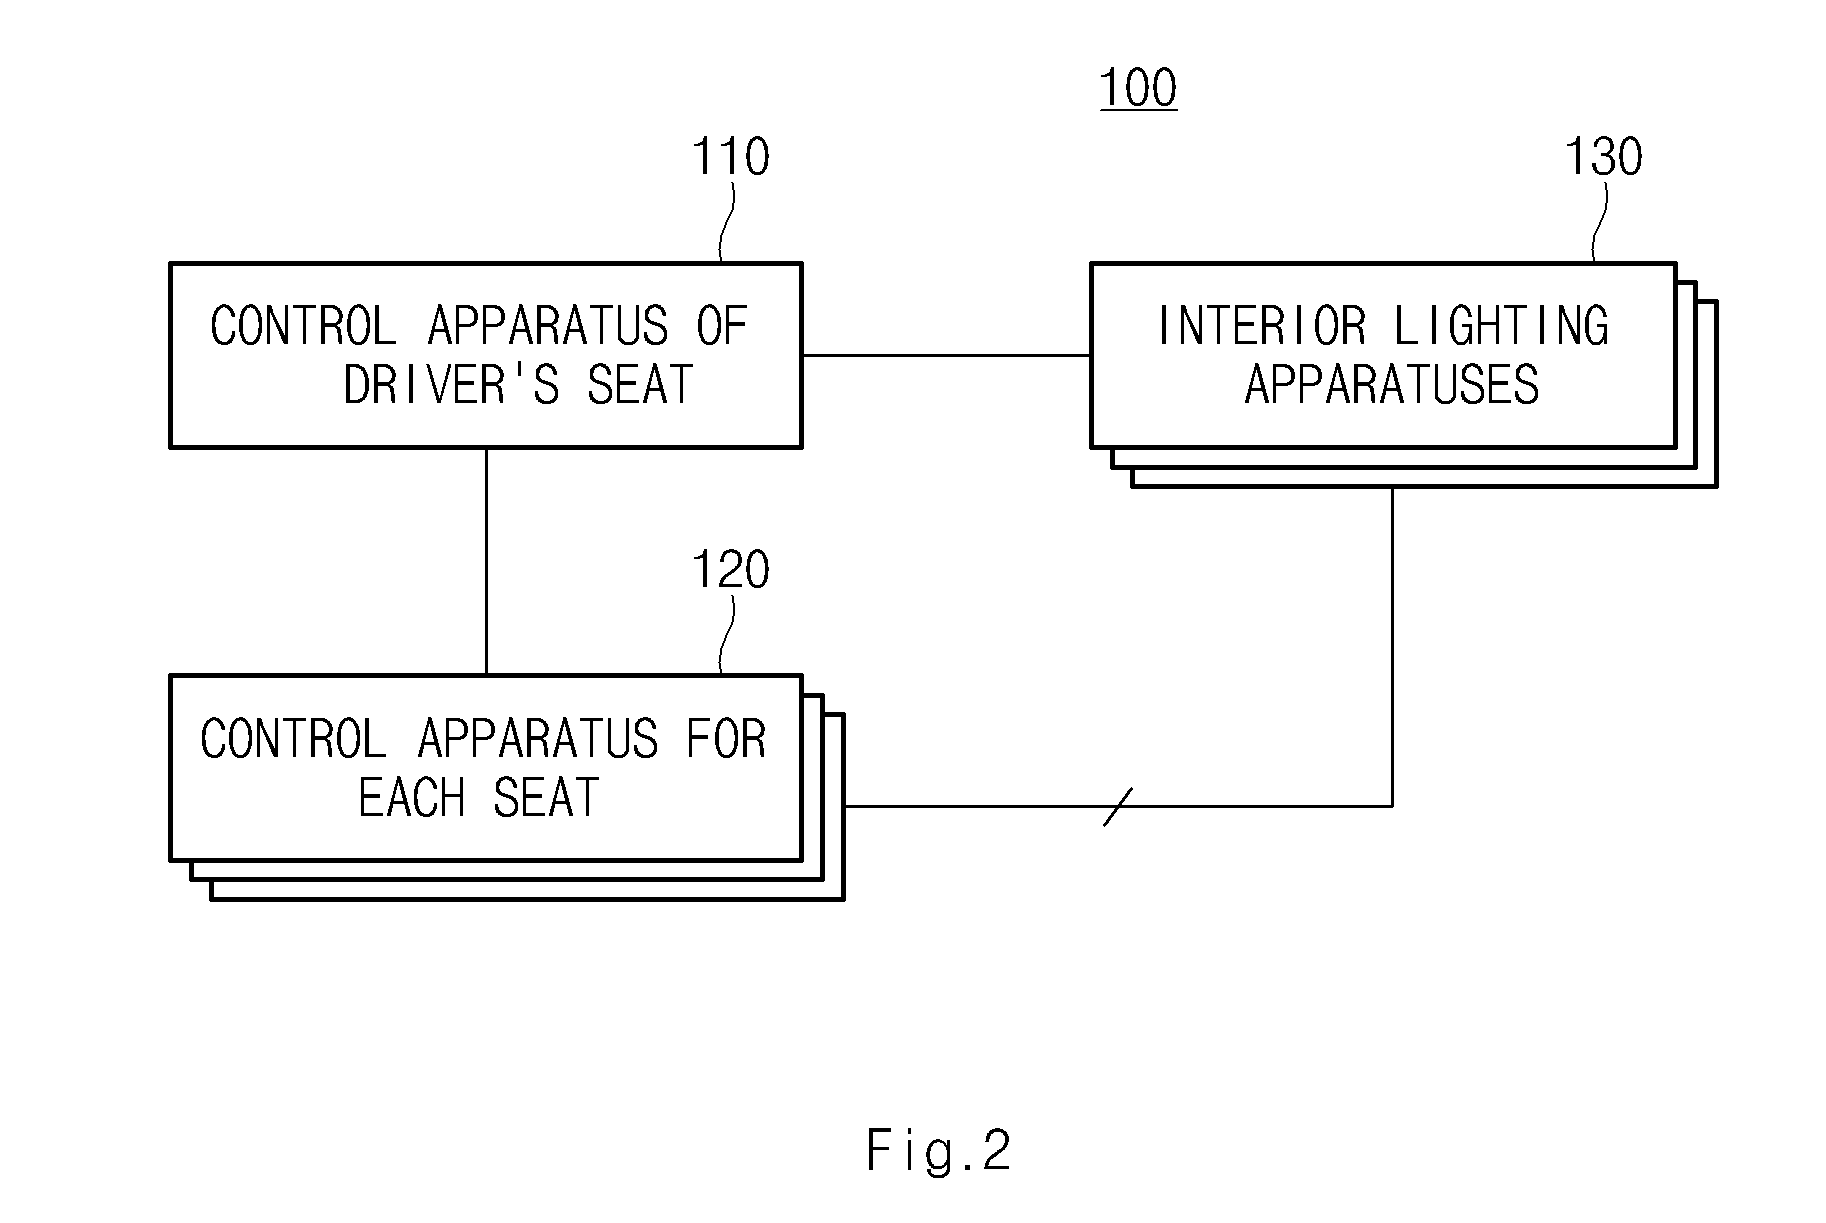 Vehicle for supporting lighting control function